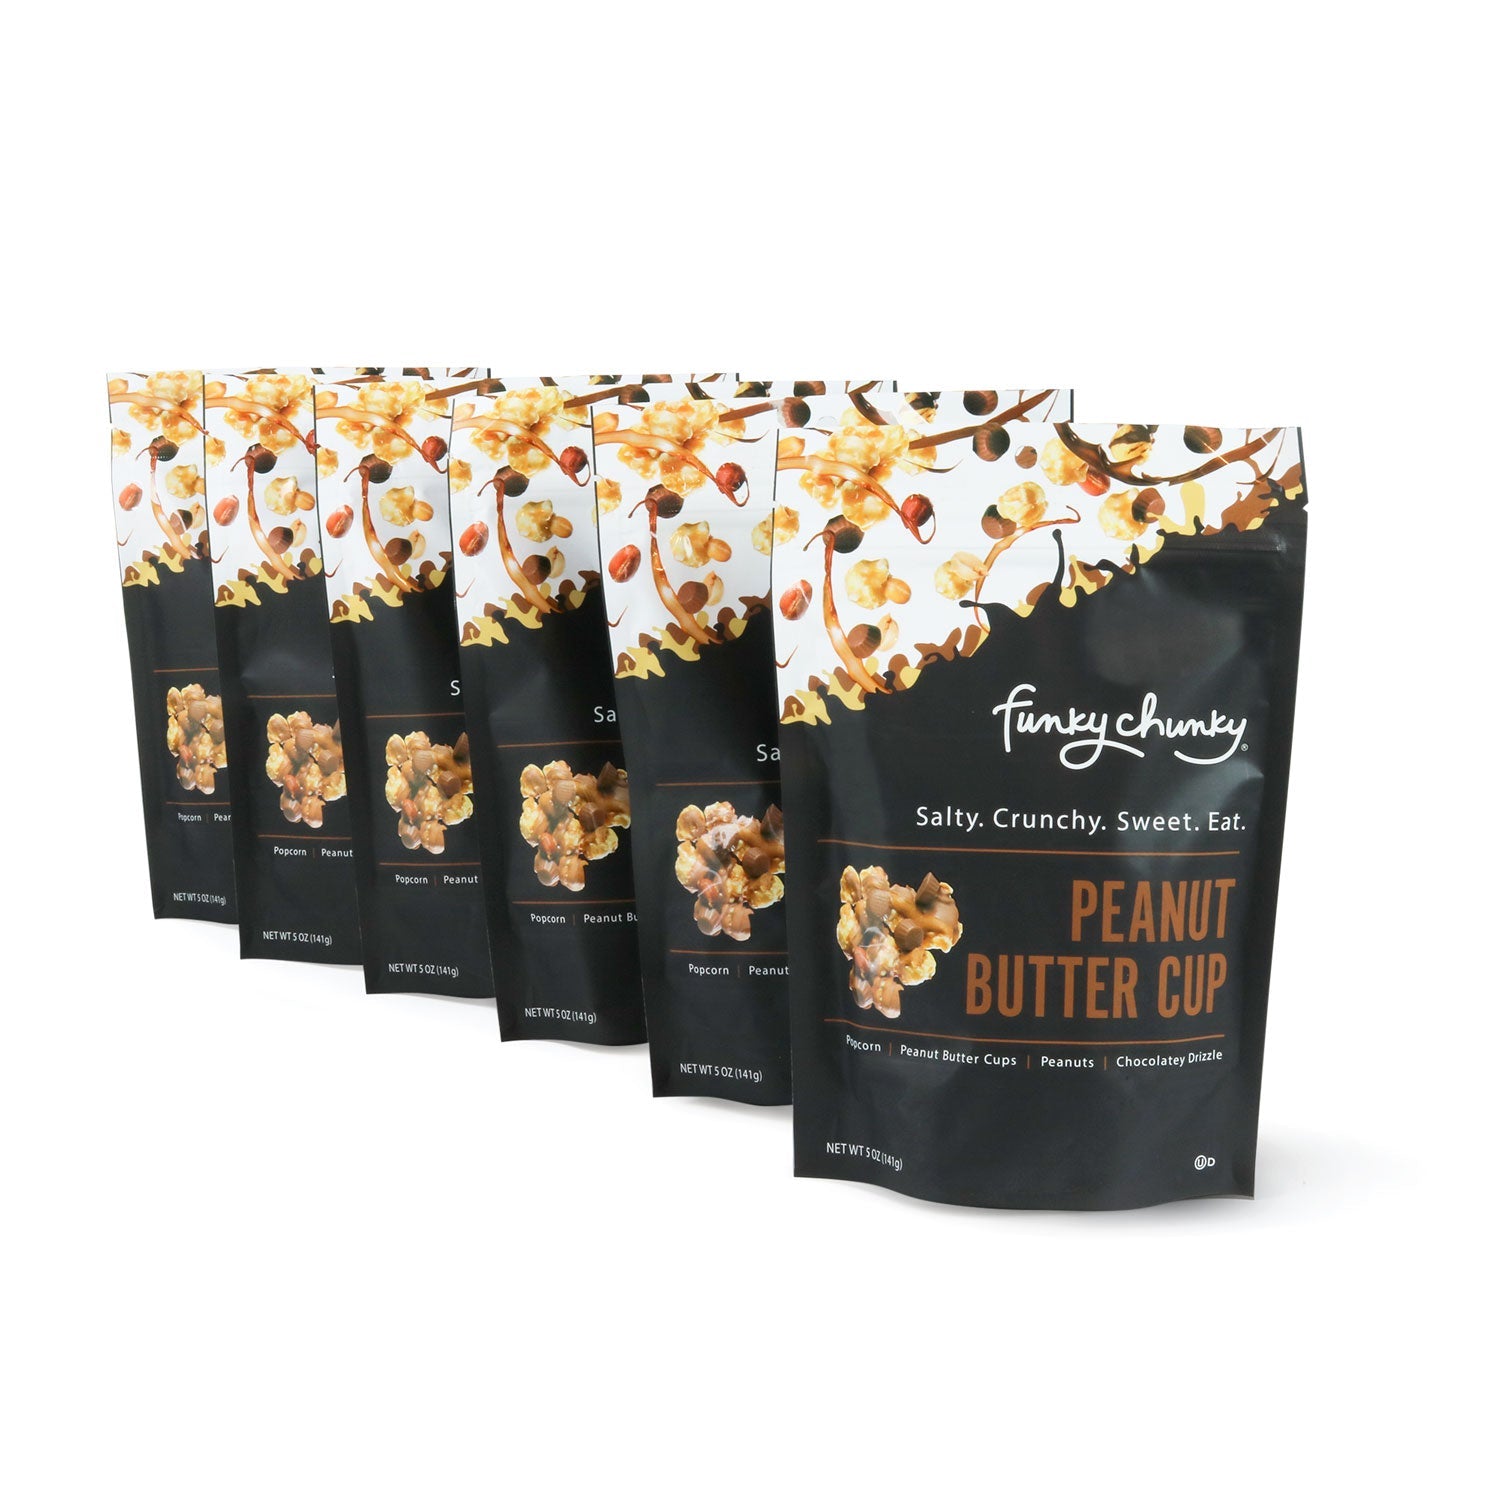 Large Bags | 5 oz - 6 pack-Large, re-sealable bags are the perfect size for stocking stuffers, office gifts or having on hand for drop-in guests. Each bag contains five servings. Includes six 5 ounce bags.-Funky Chunky